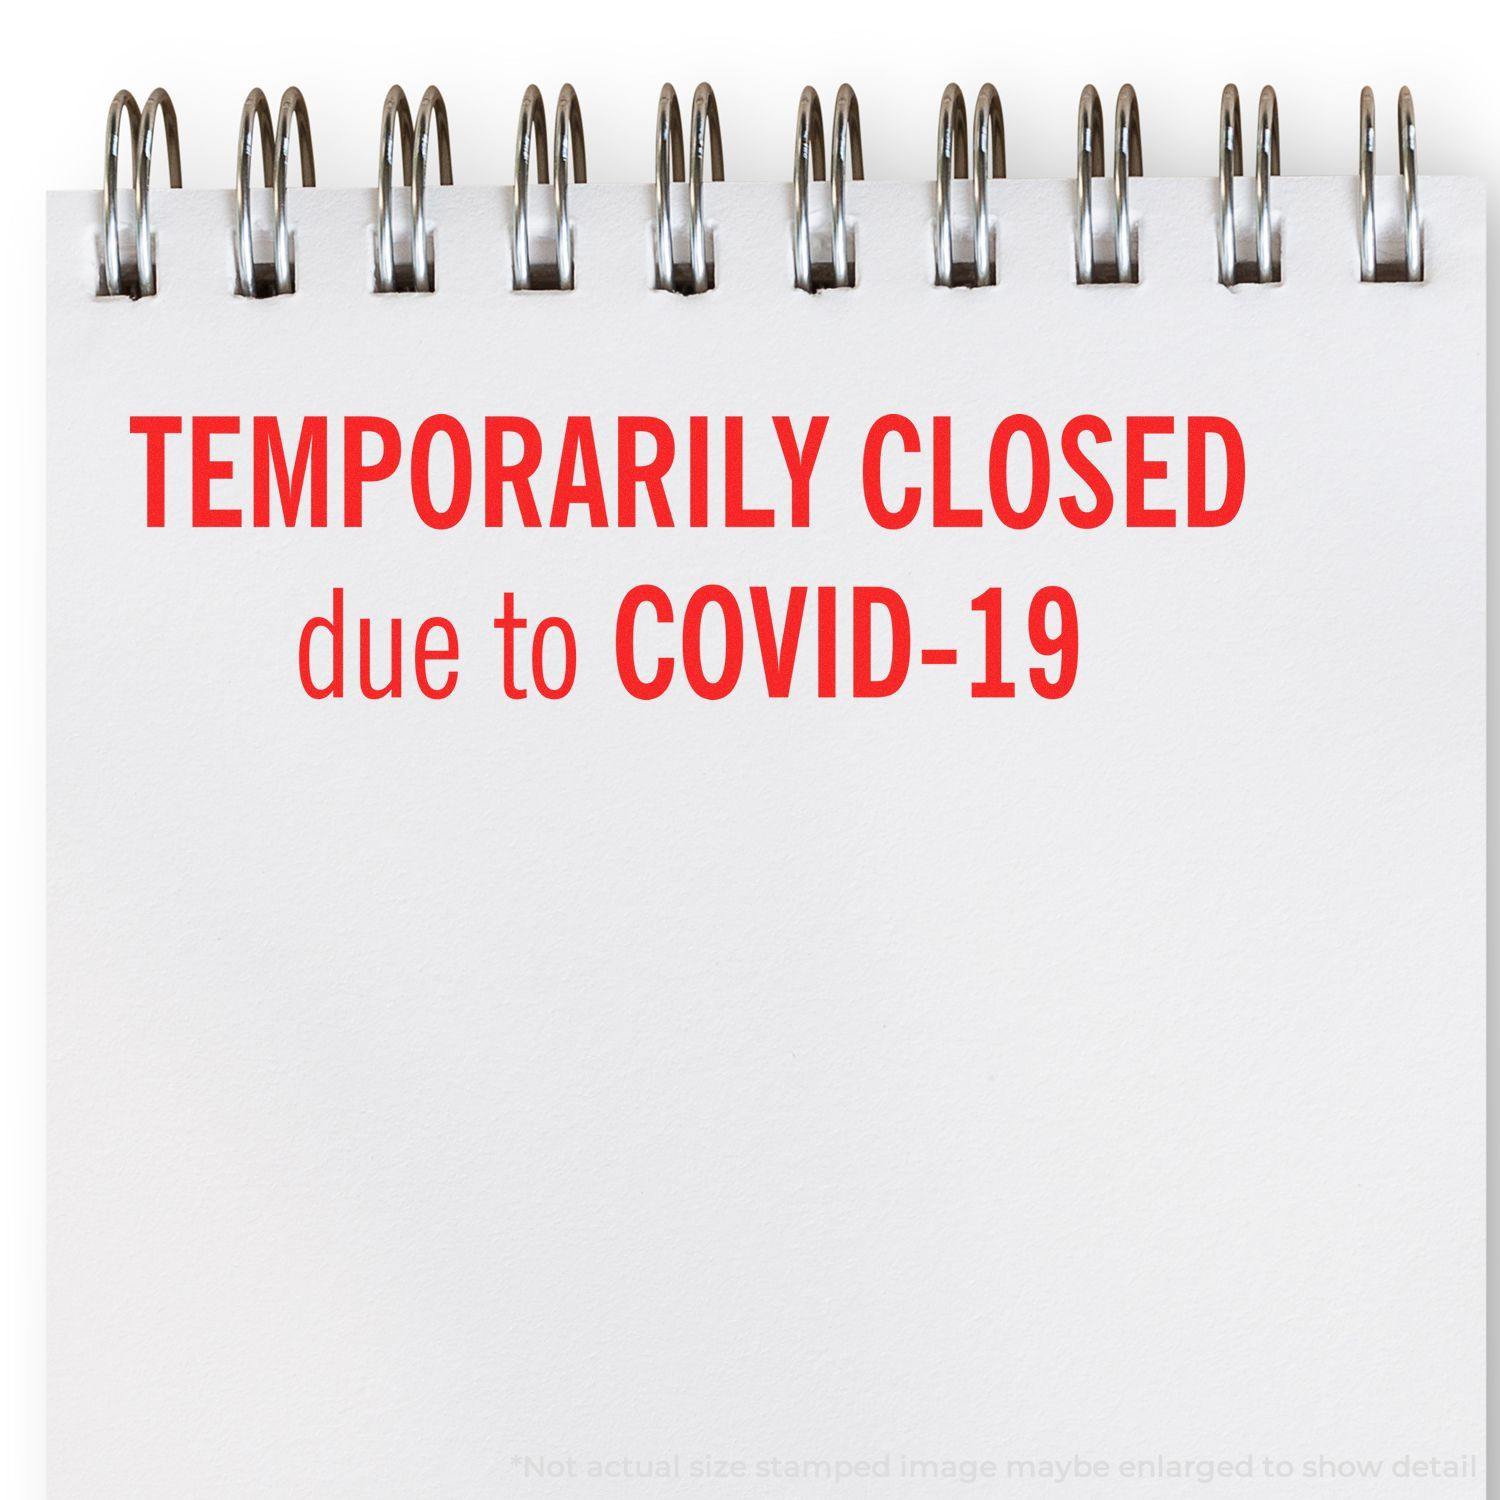 A self-inking stamp with a stamped image showing how the text "TEMPORARILY CLOSED due to COVID -19" in a large font is displayed by it after stamping.